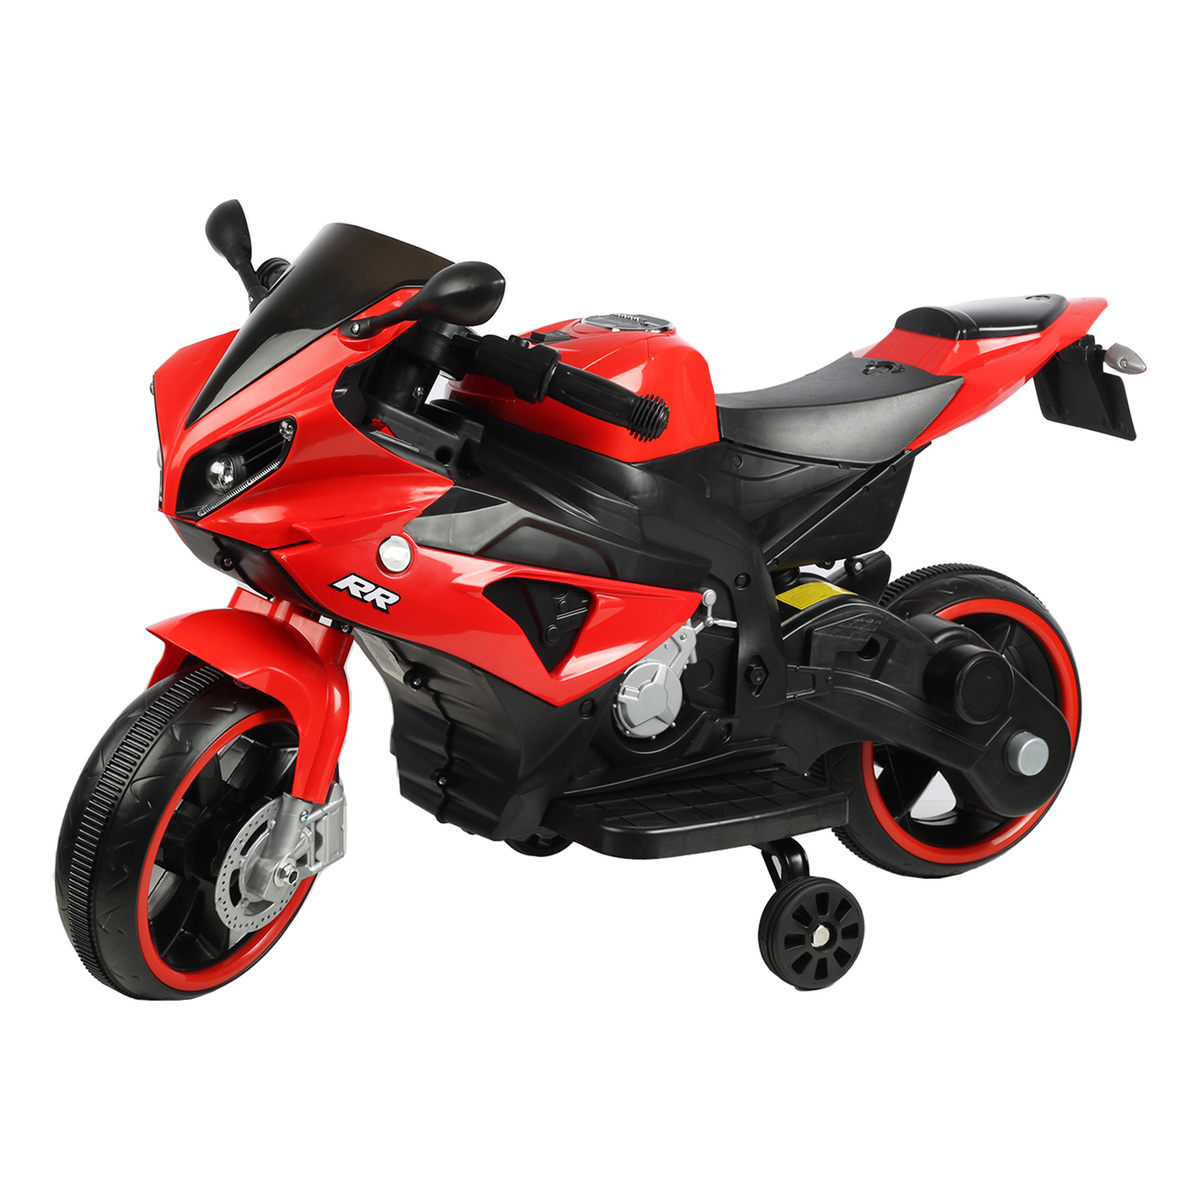 Skid Fusion Child Motor Cycle Red XGZ2000